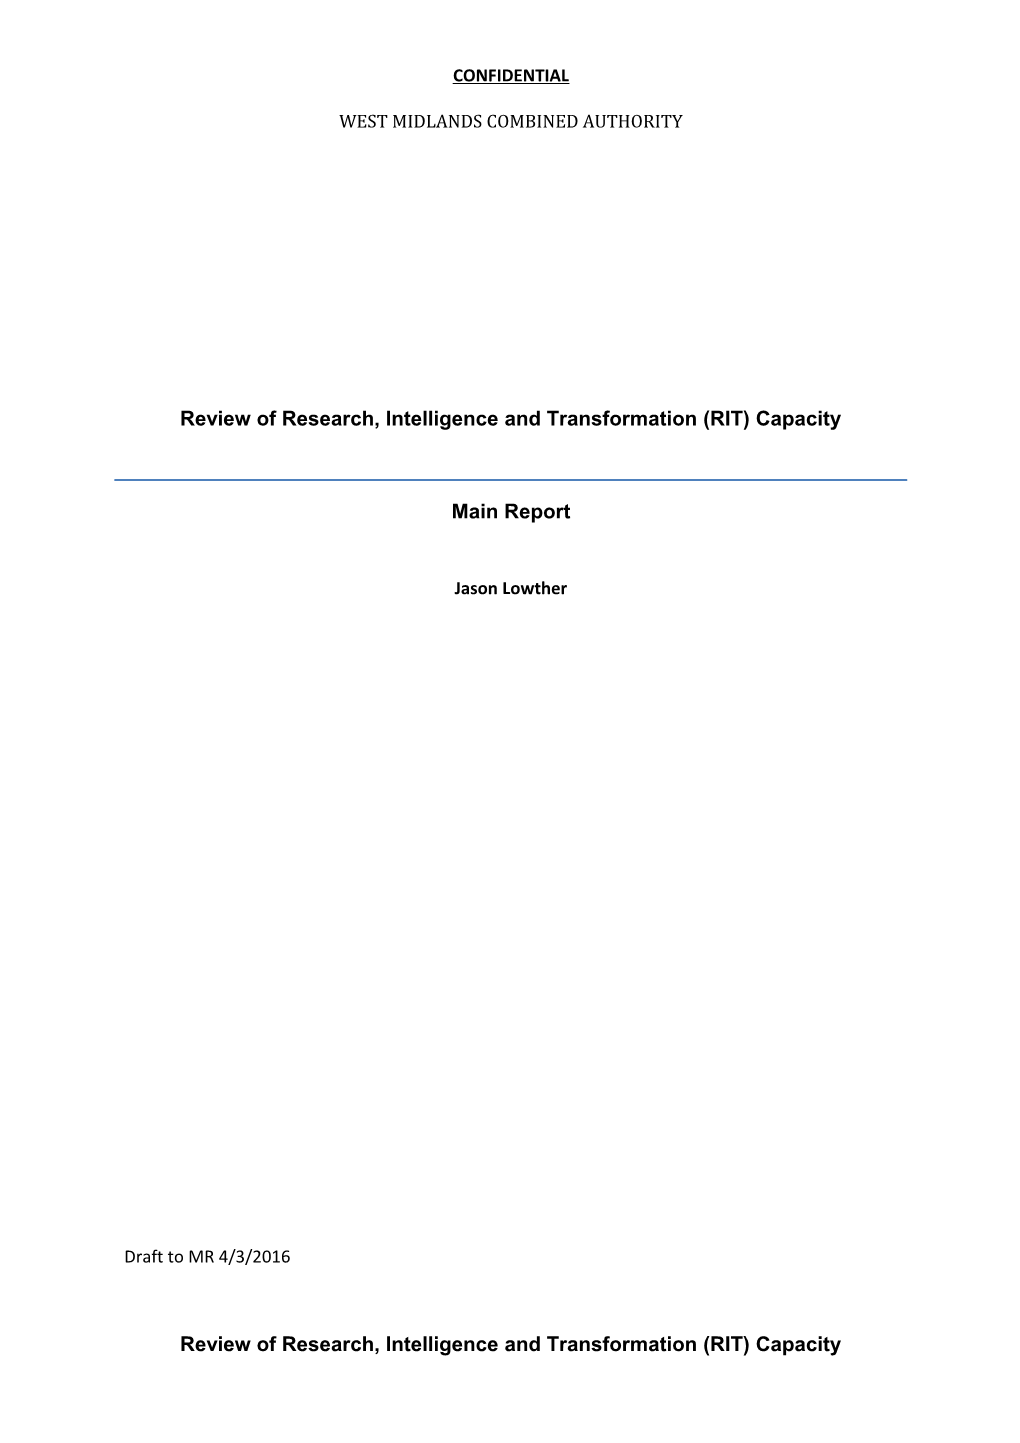 Review of Research, Intelligence and Transformation (RIT) Capacity